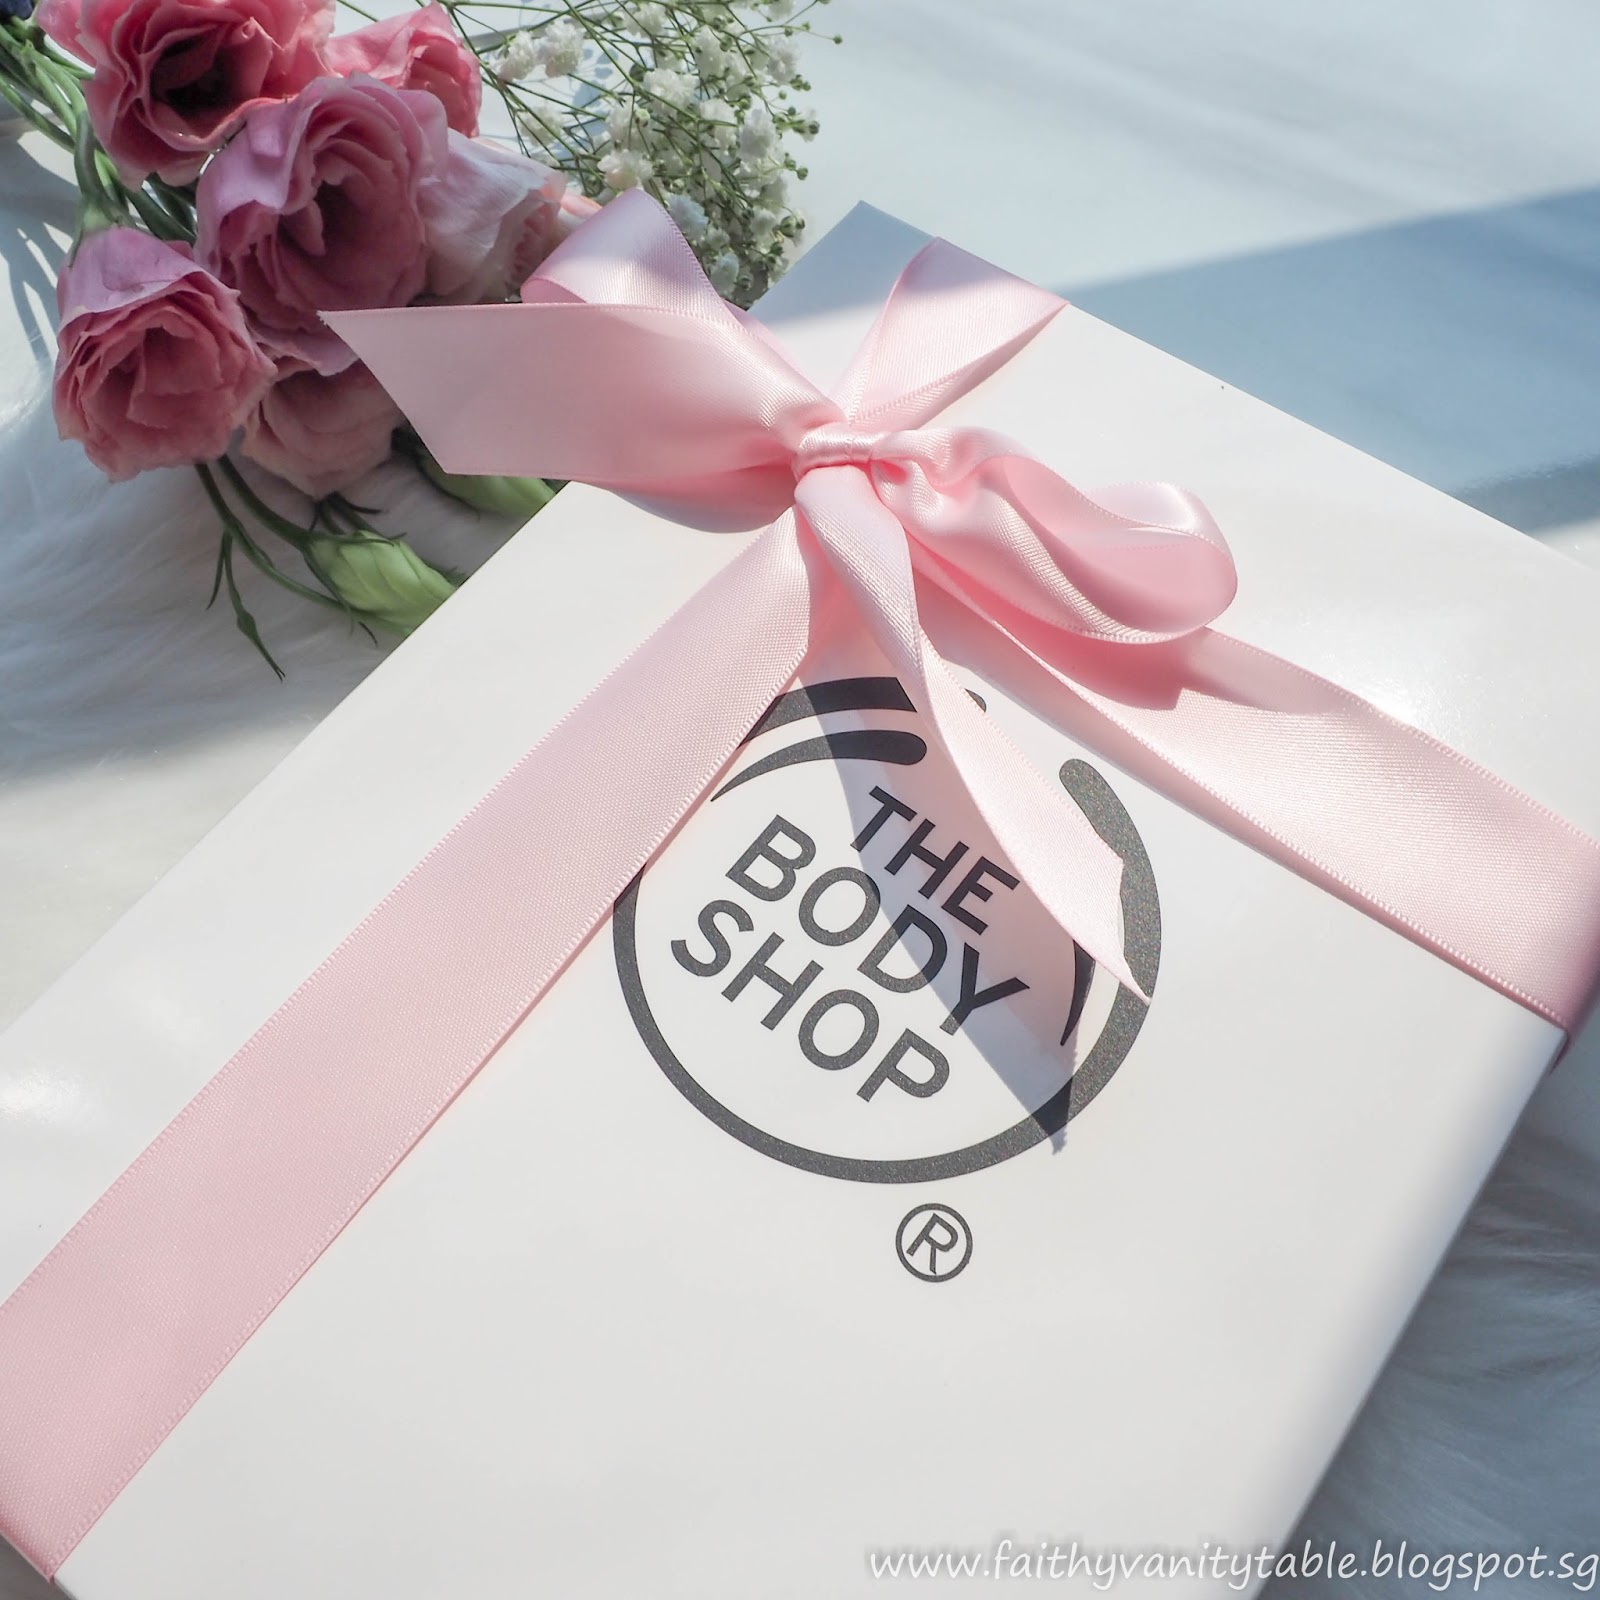 Singapore Beauty, Travel and Lifestyle Blog: Review of The Body Shop Drops Of Light™ Brightening Eye Cream and Pure Healthy Brightening Serum